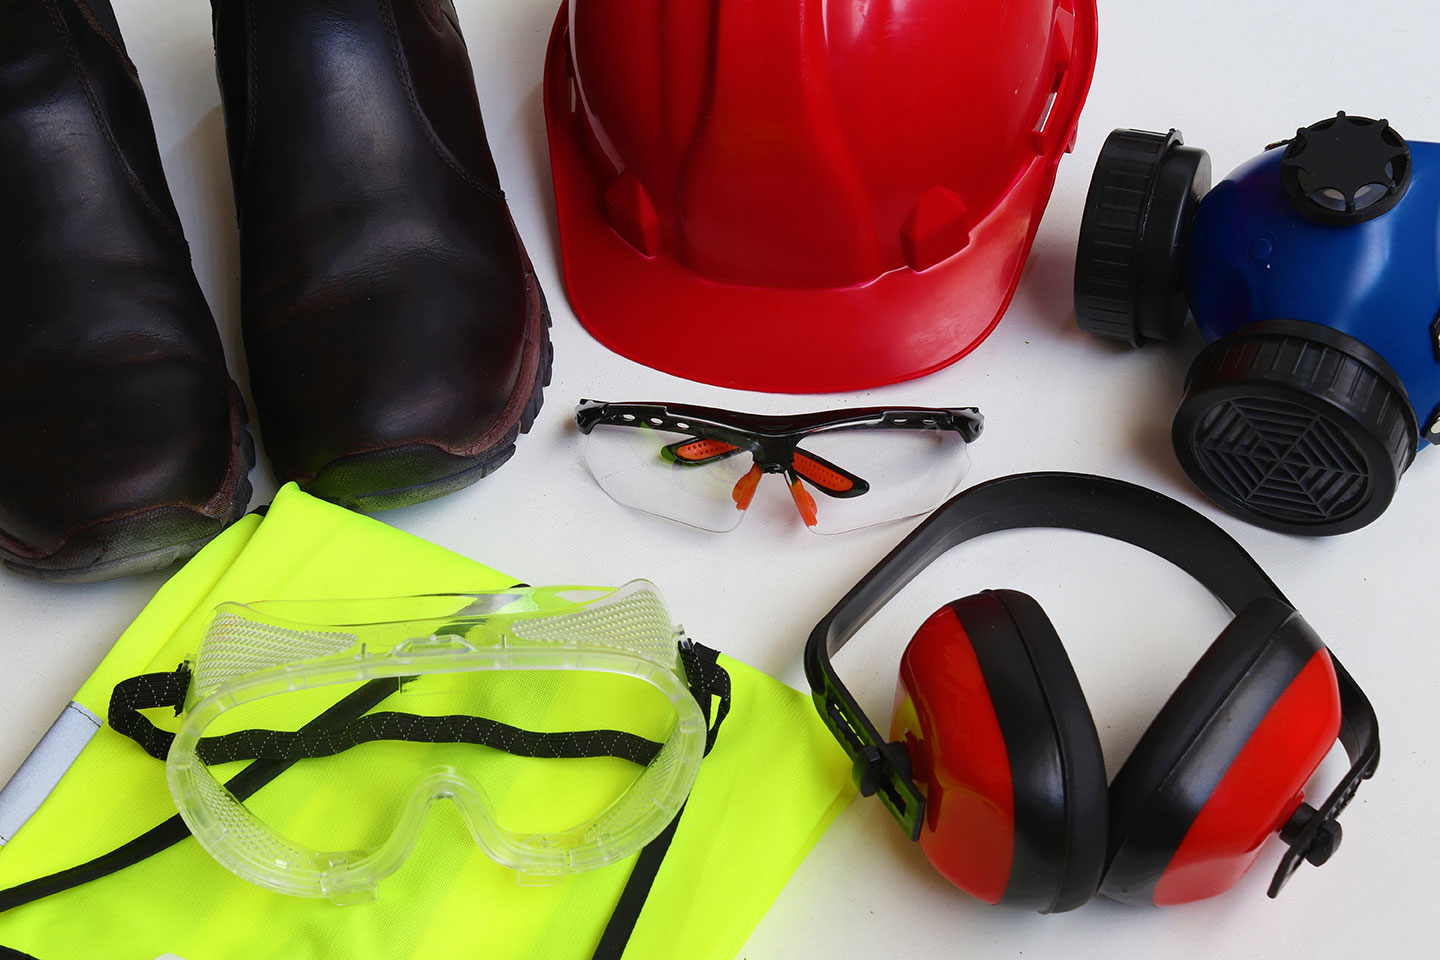 ppe for power tools and equipment should include